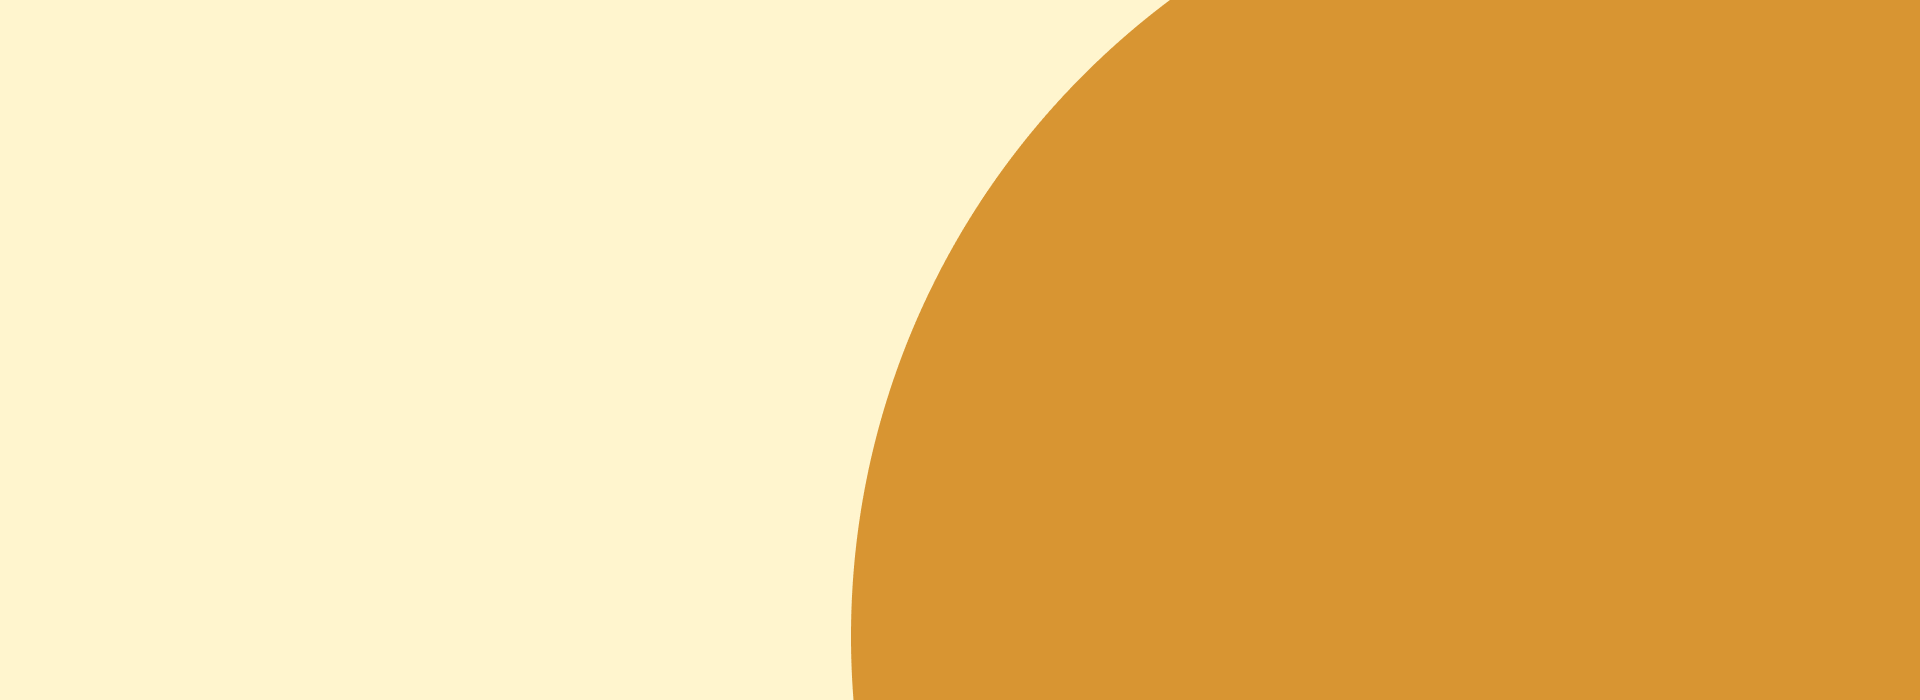 Yellow background with circles